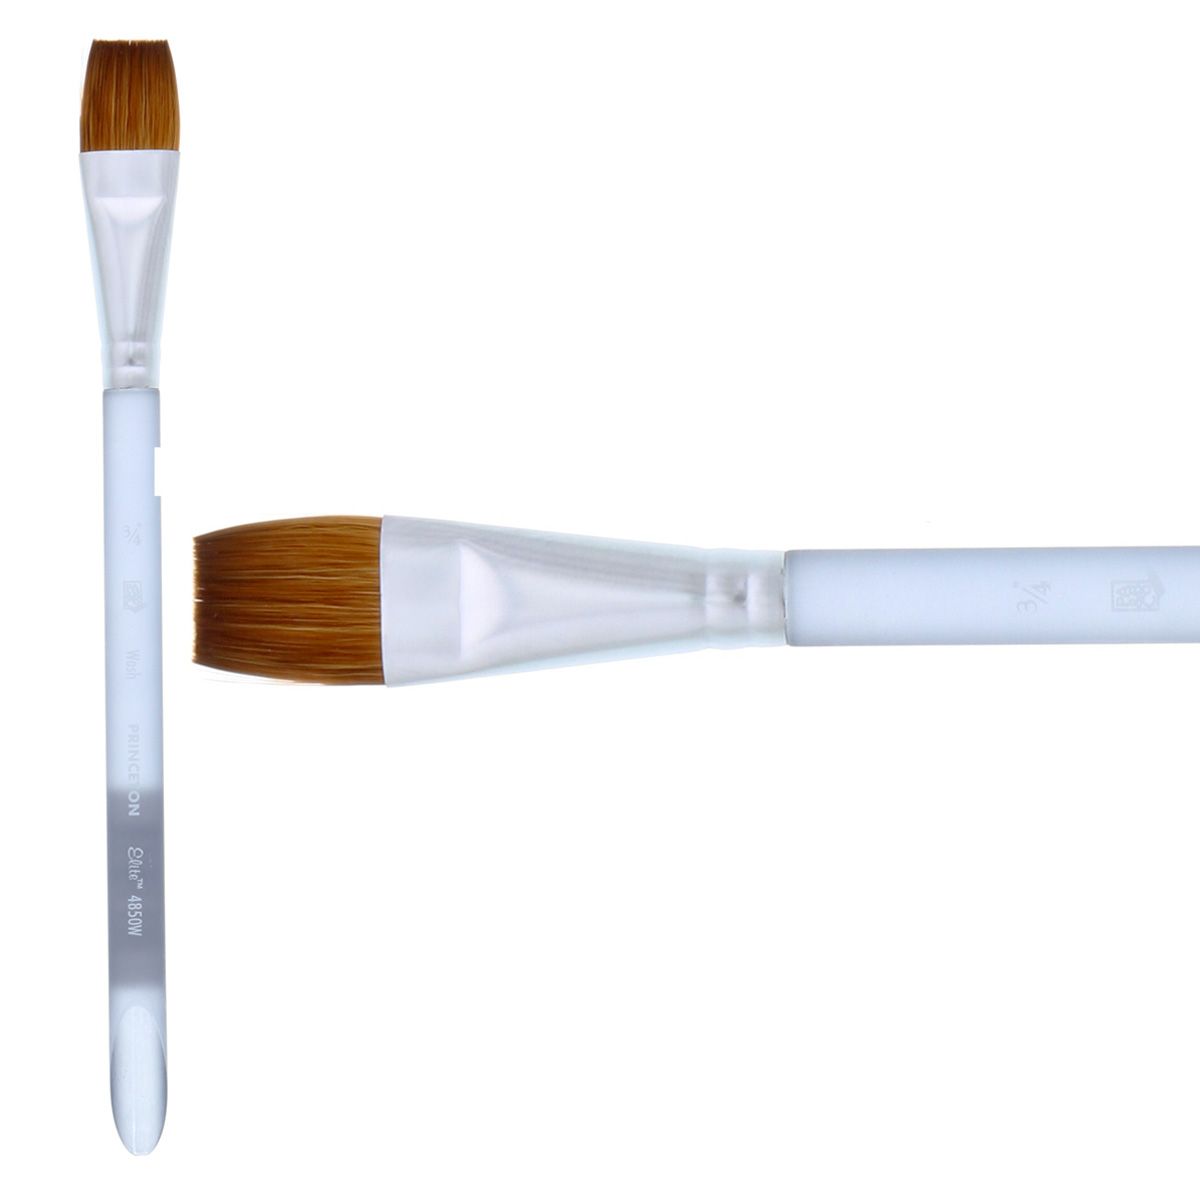 Princeton Synthetic Sable Watercolor Round Brush 16